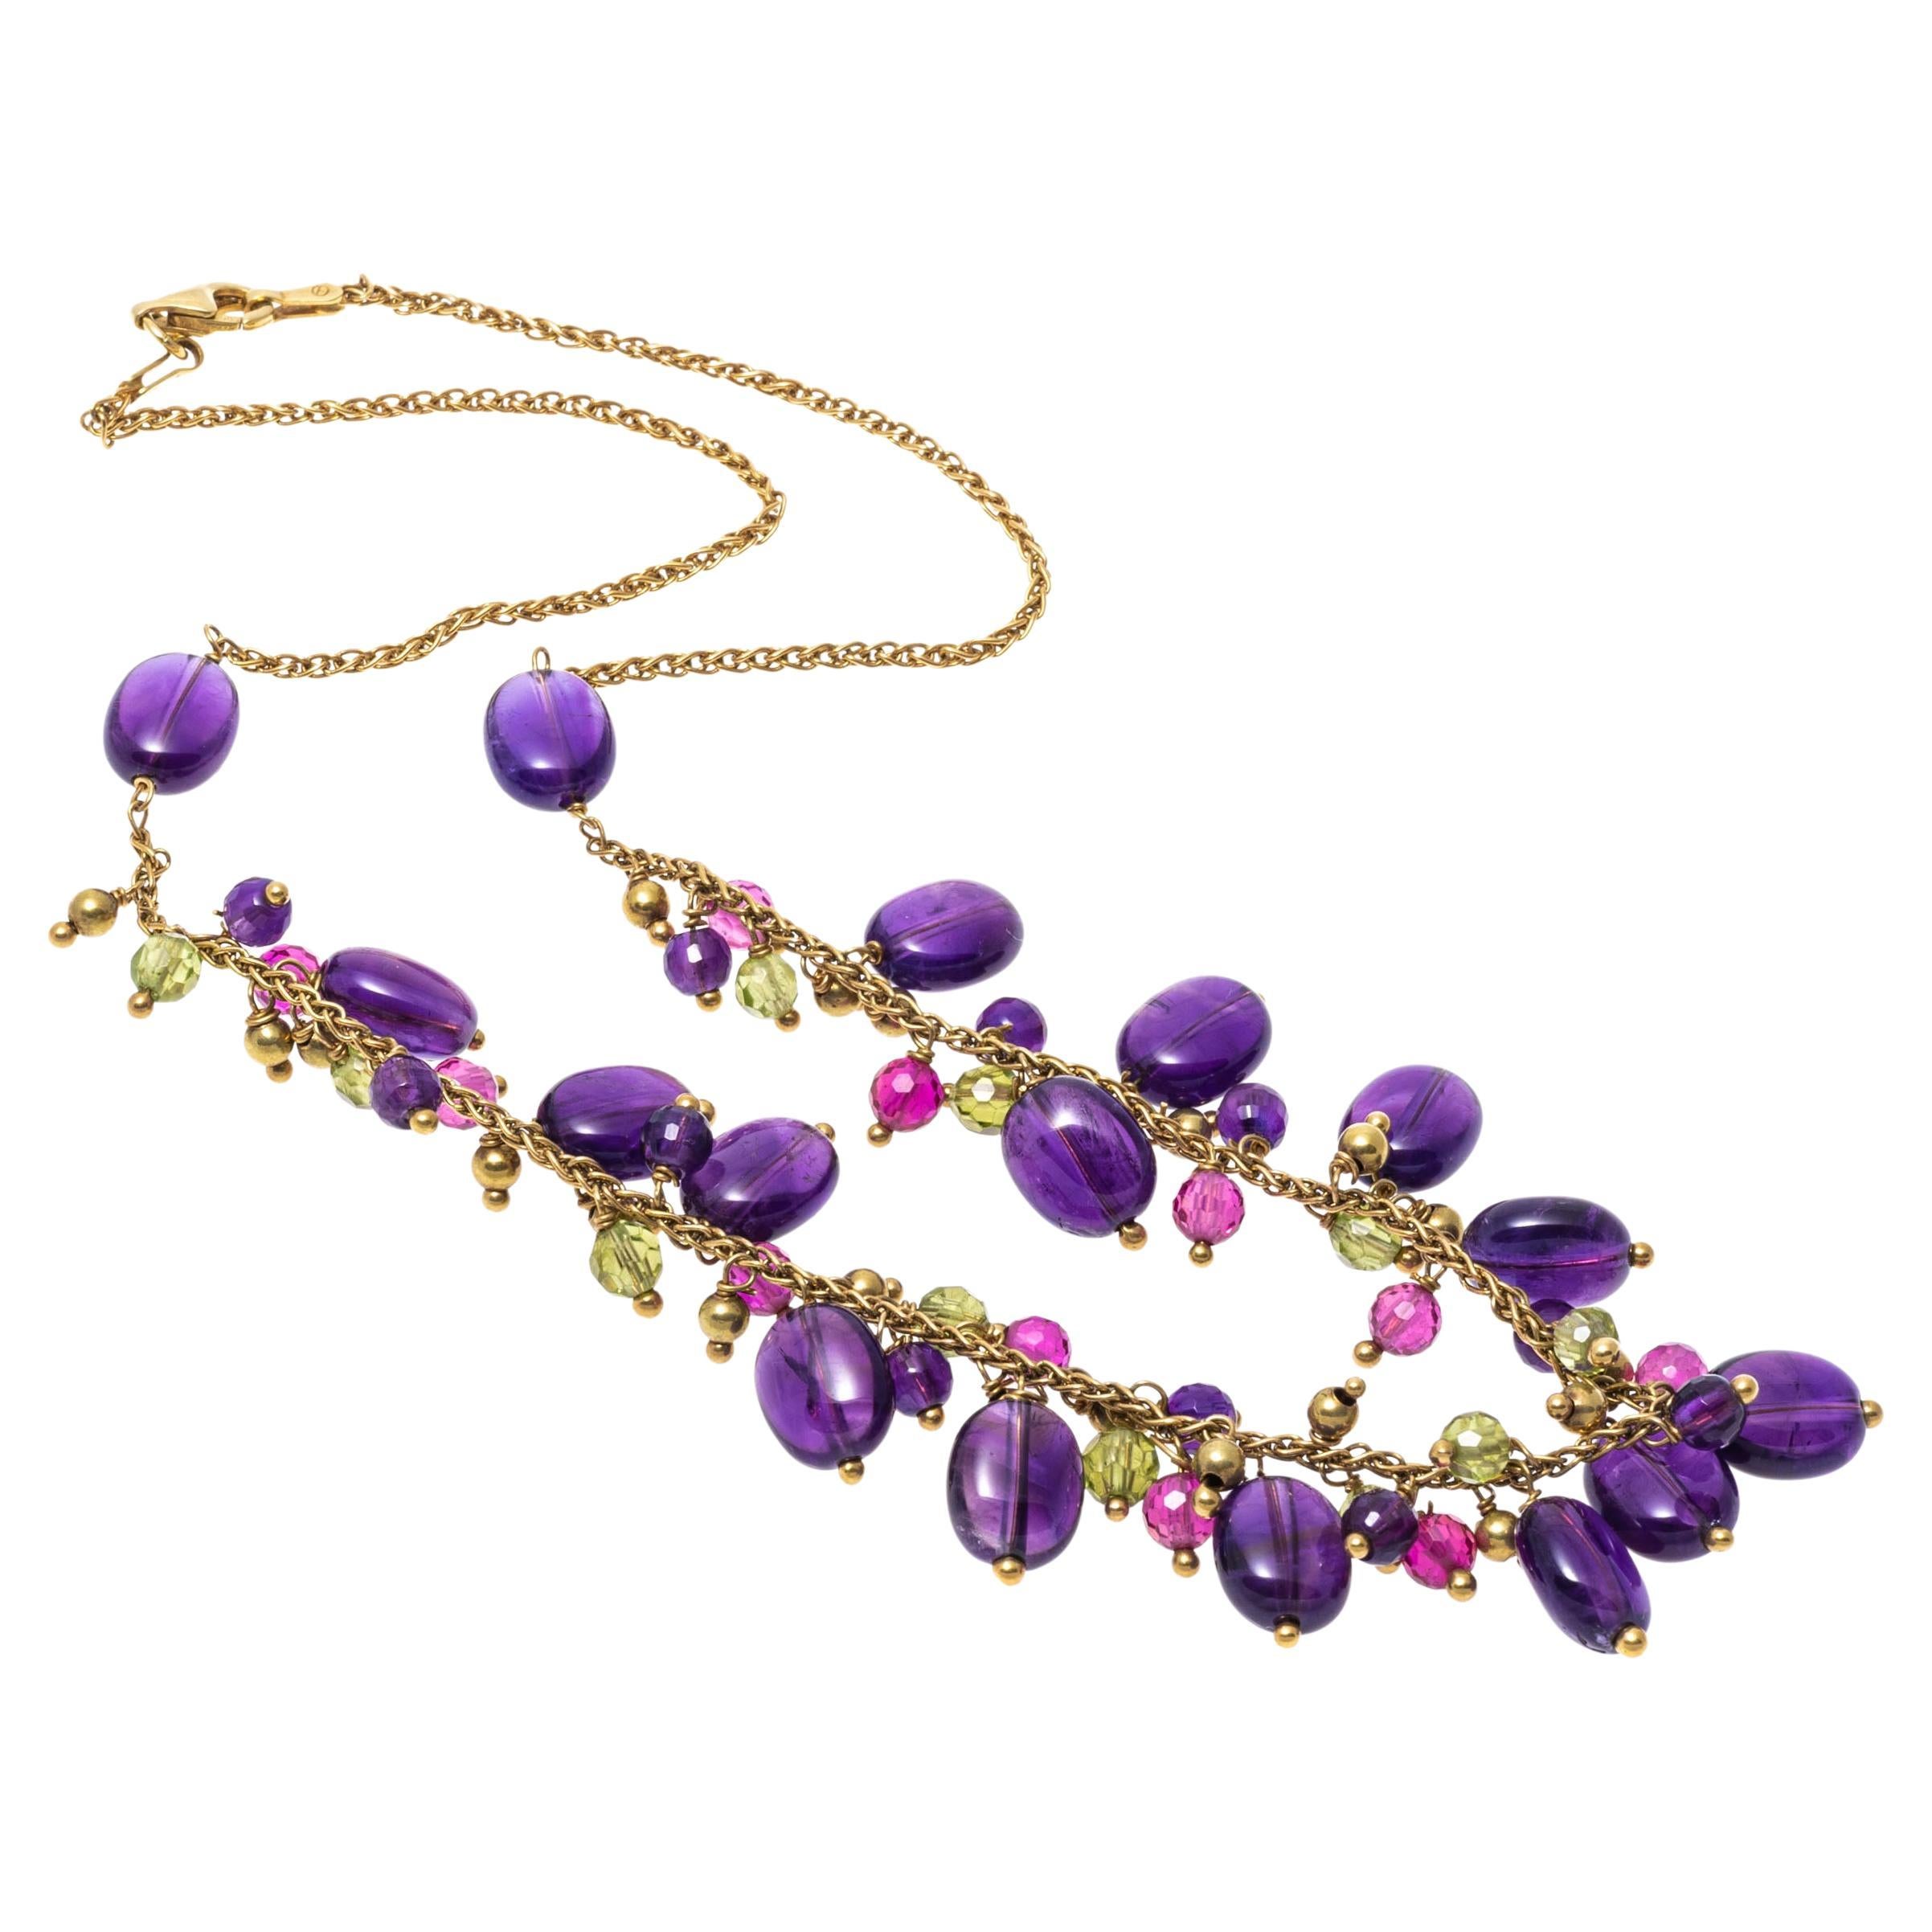 Colorful Amethyst, Ruby And Peridot Cluster Beaded Chain Necklace